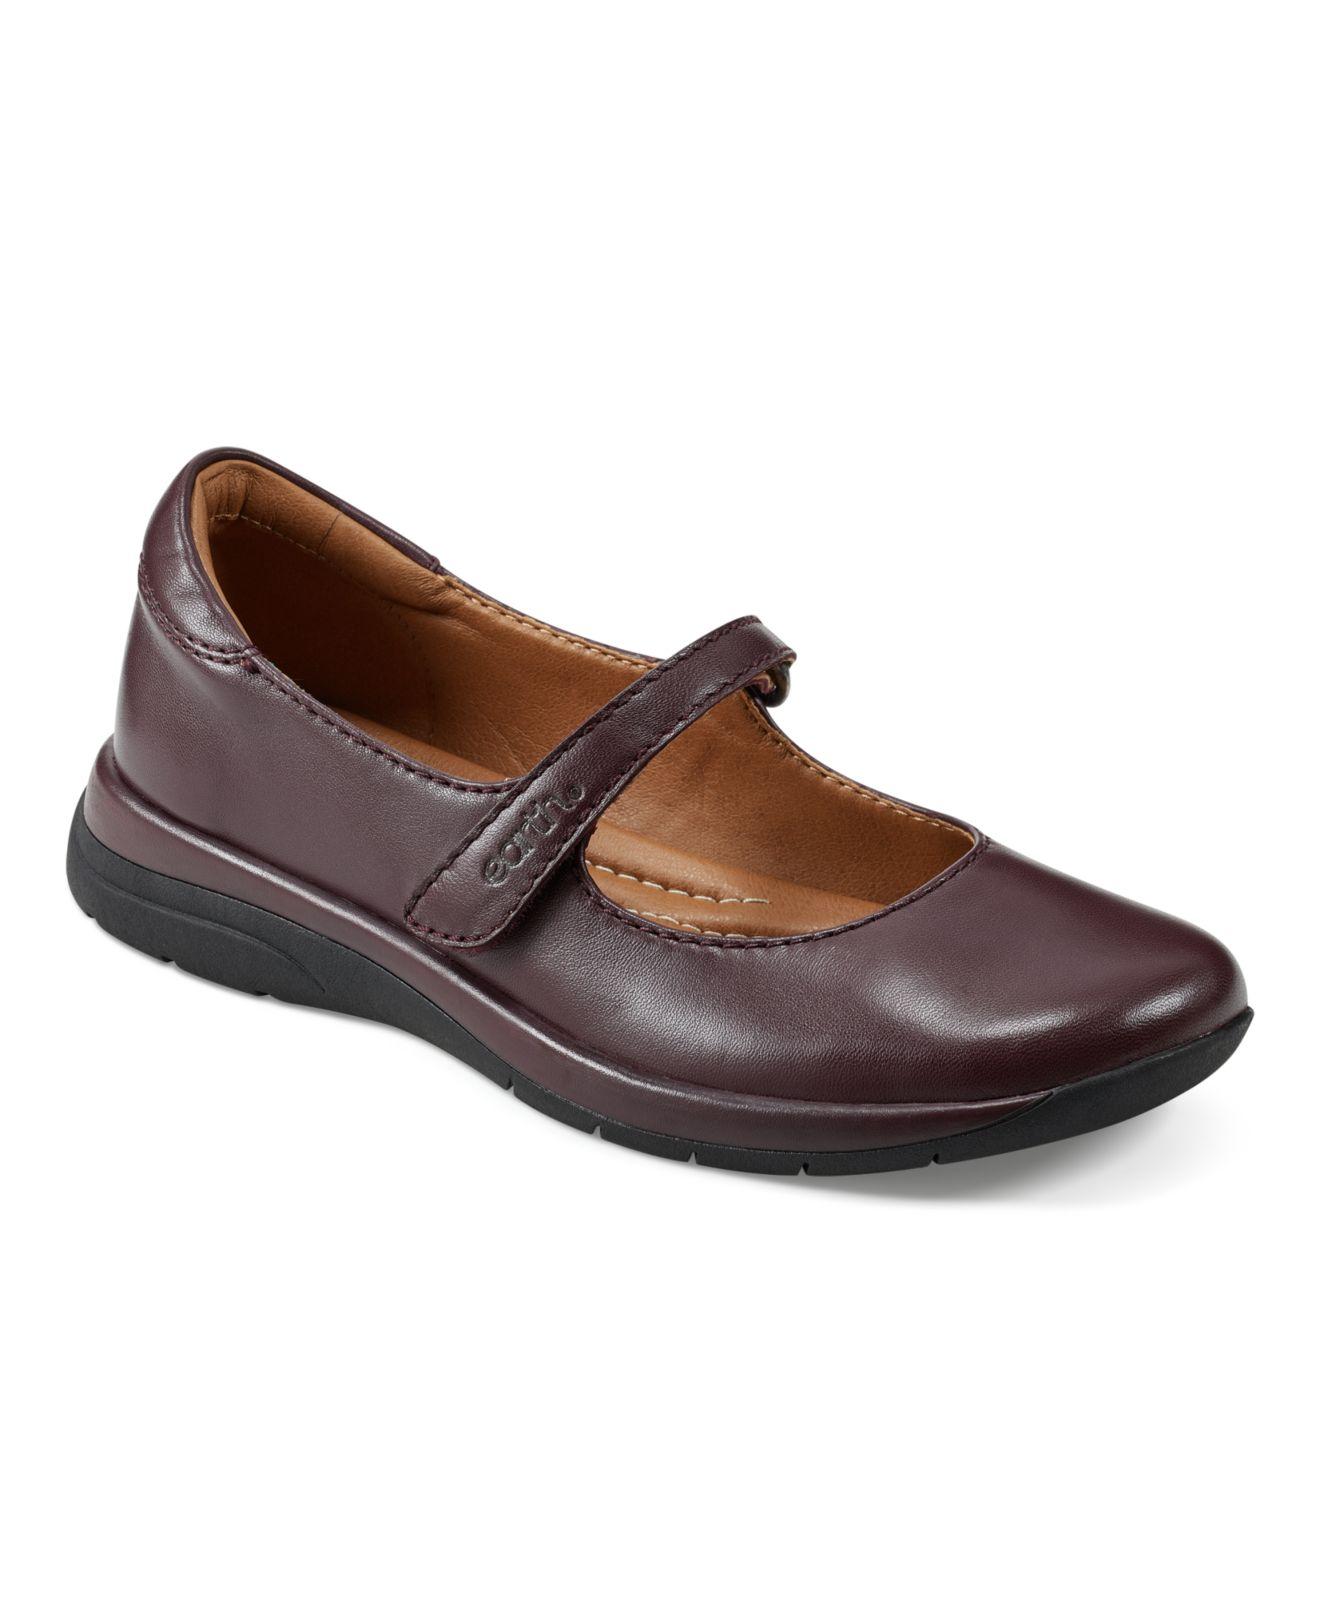 Earth Tose Round Toe Mary Jane Casual Ballet Flats in Brown | Lyst